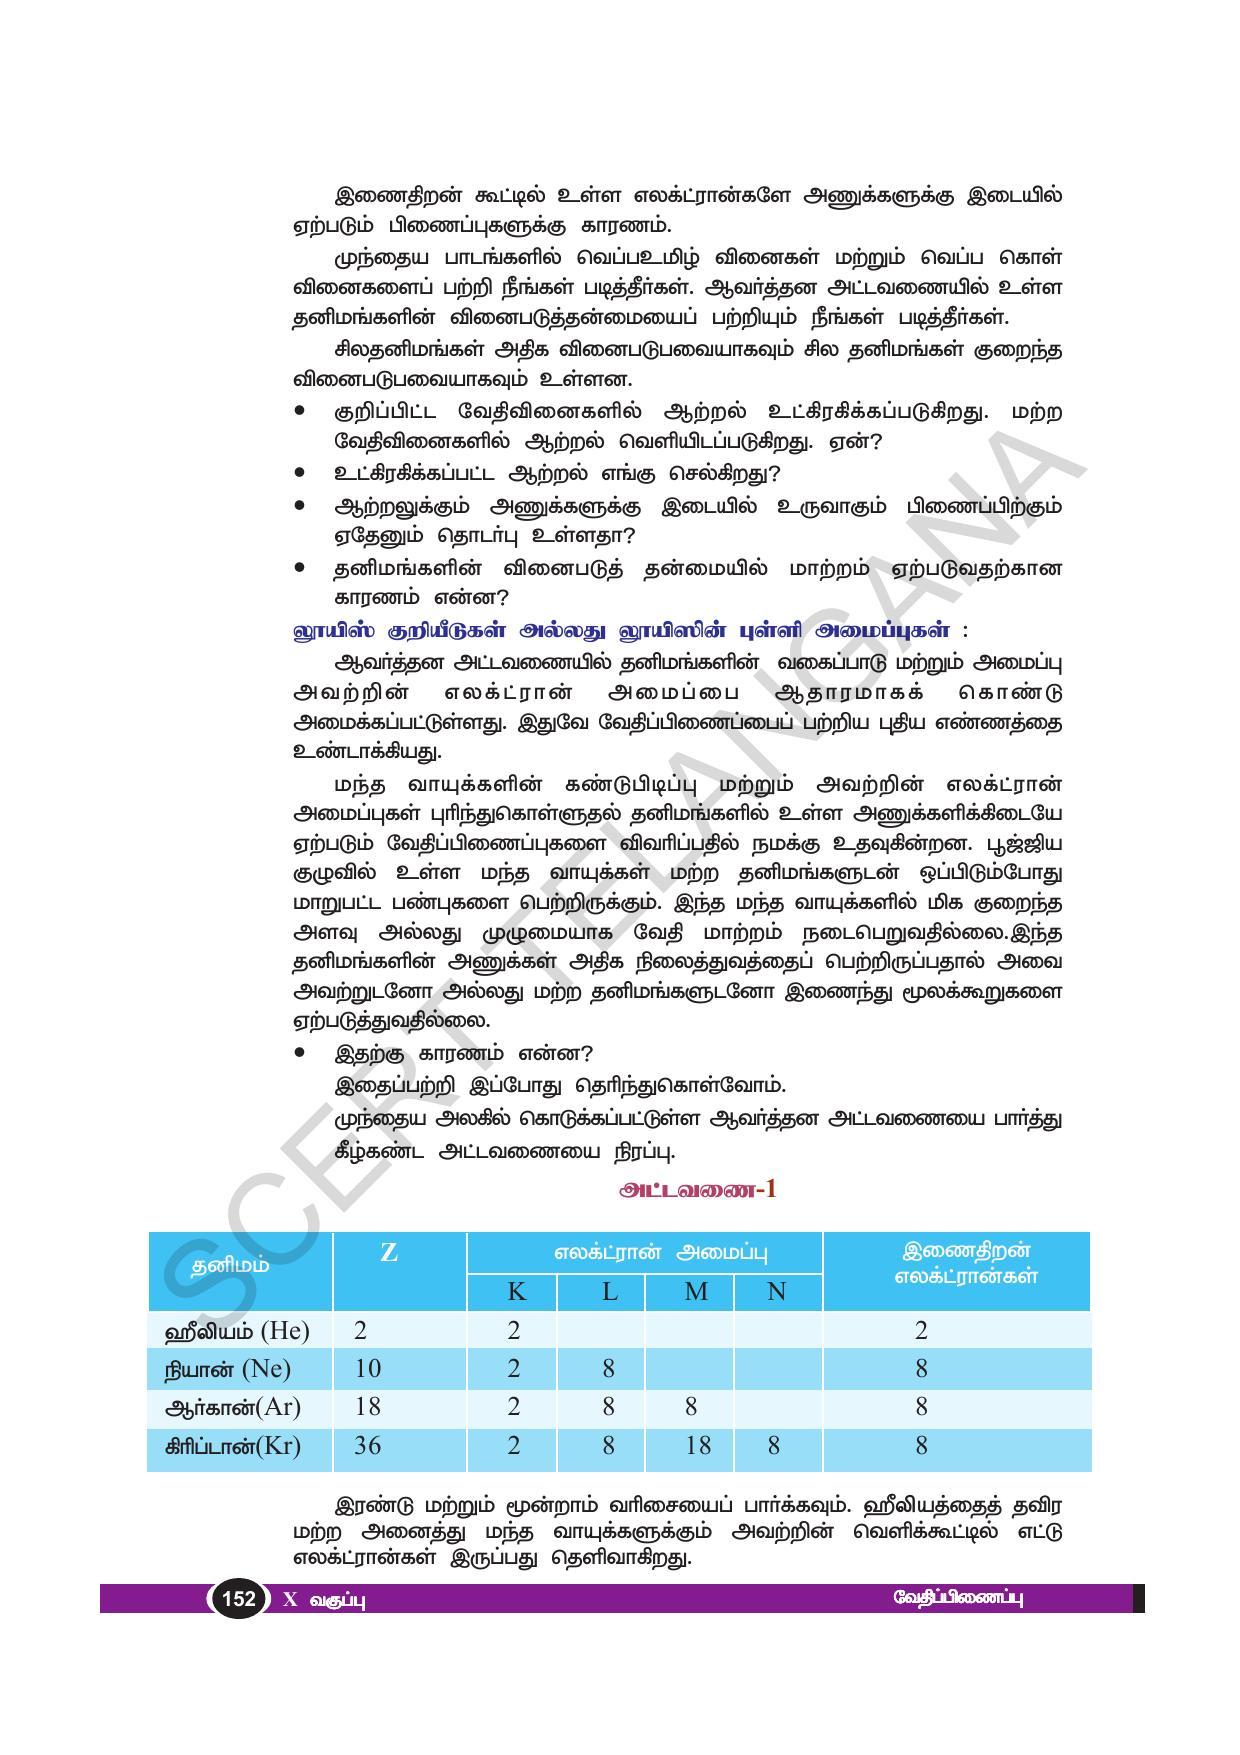 TS SCERT Class 10 Physical Science(Tamil Medium) Text Book - Page 164